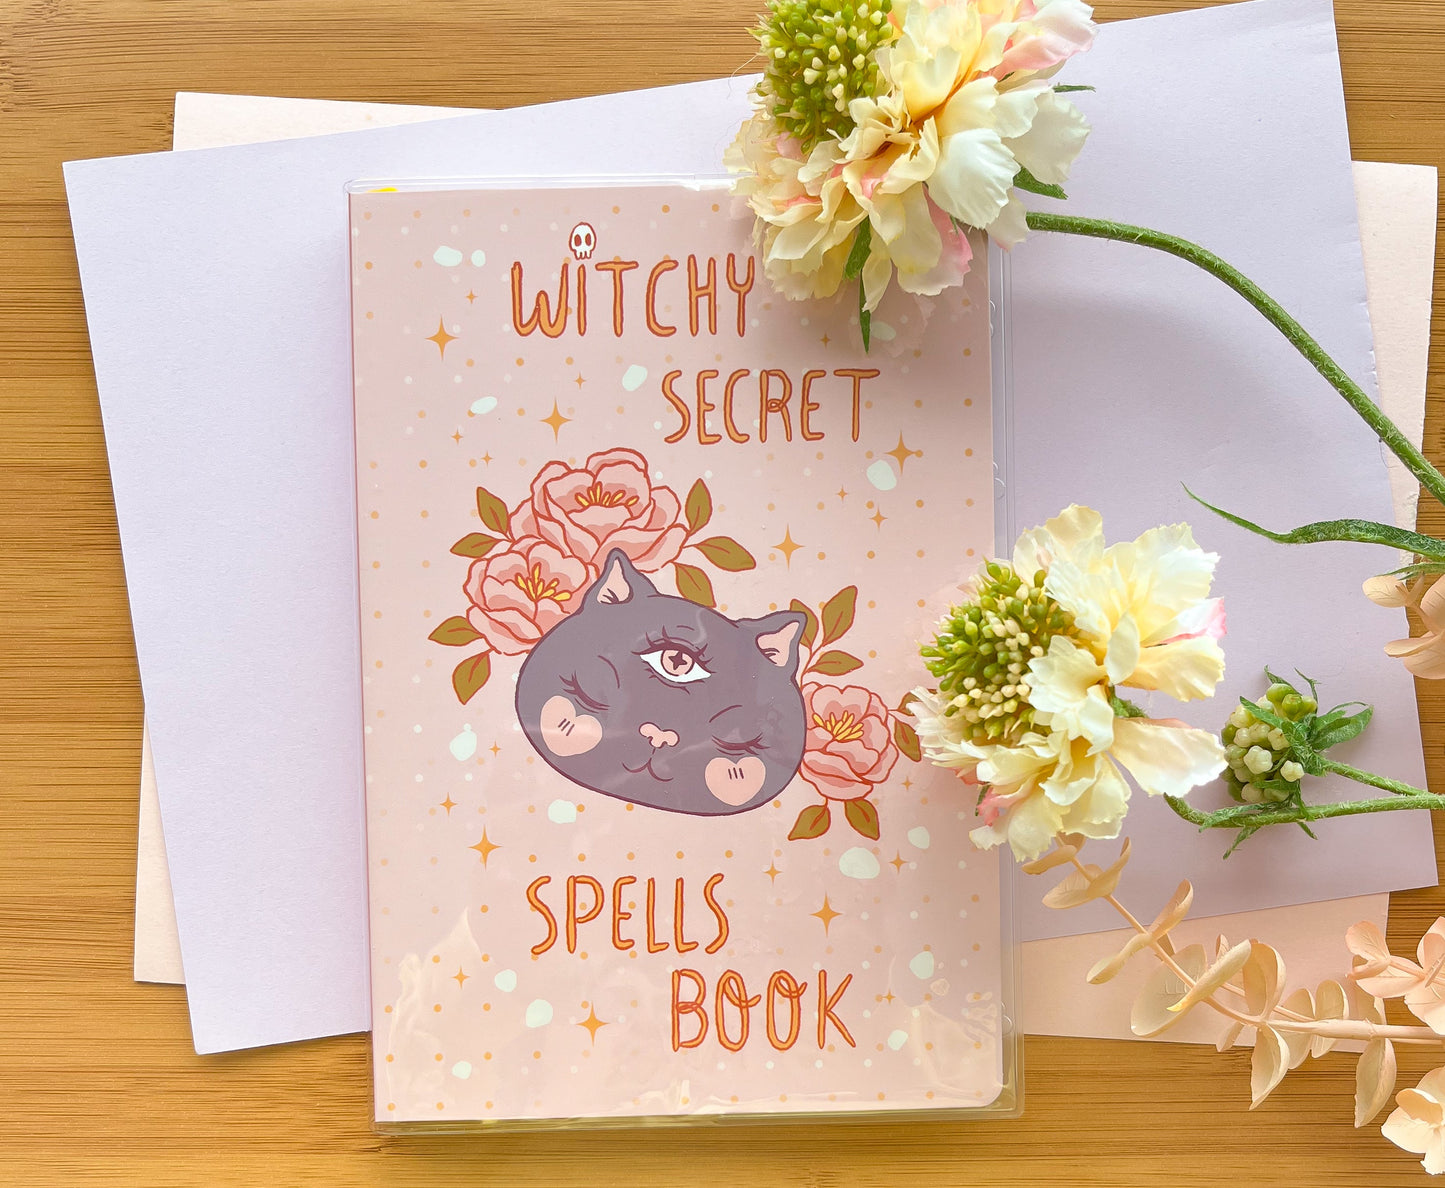 WITCHY SPELLS BOOK